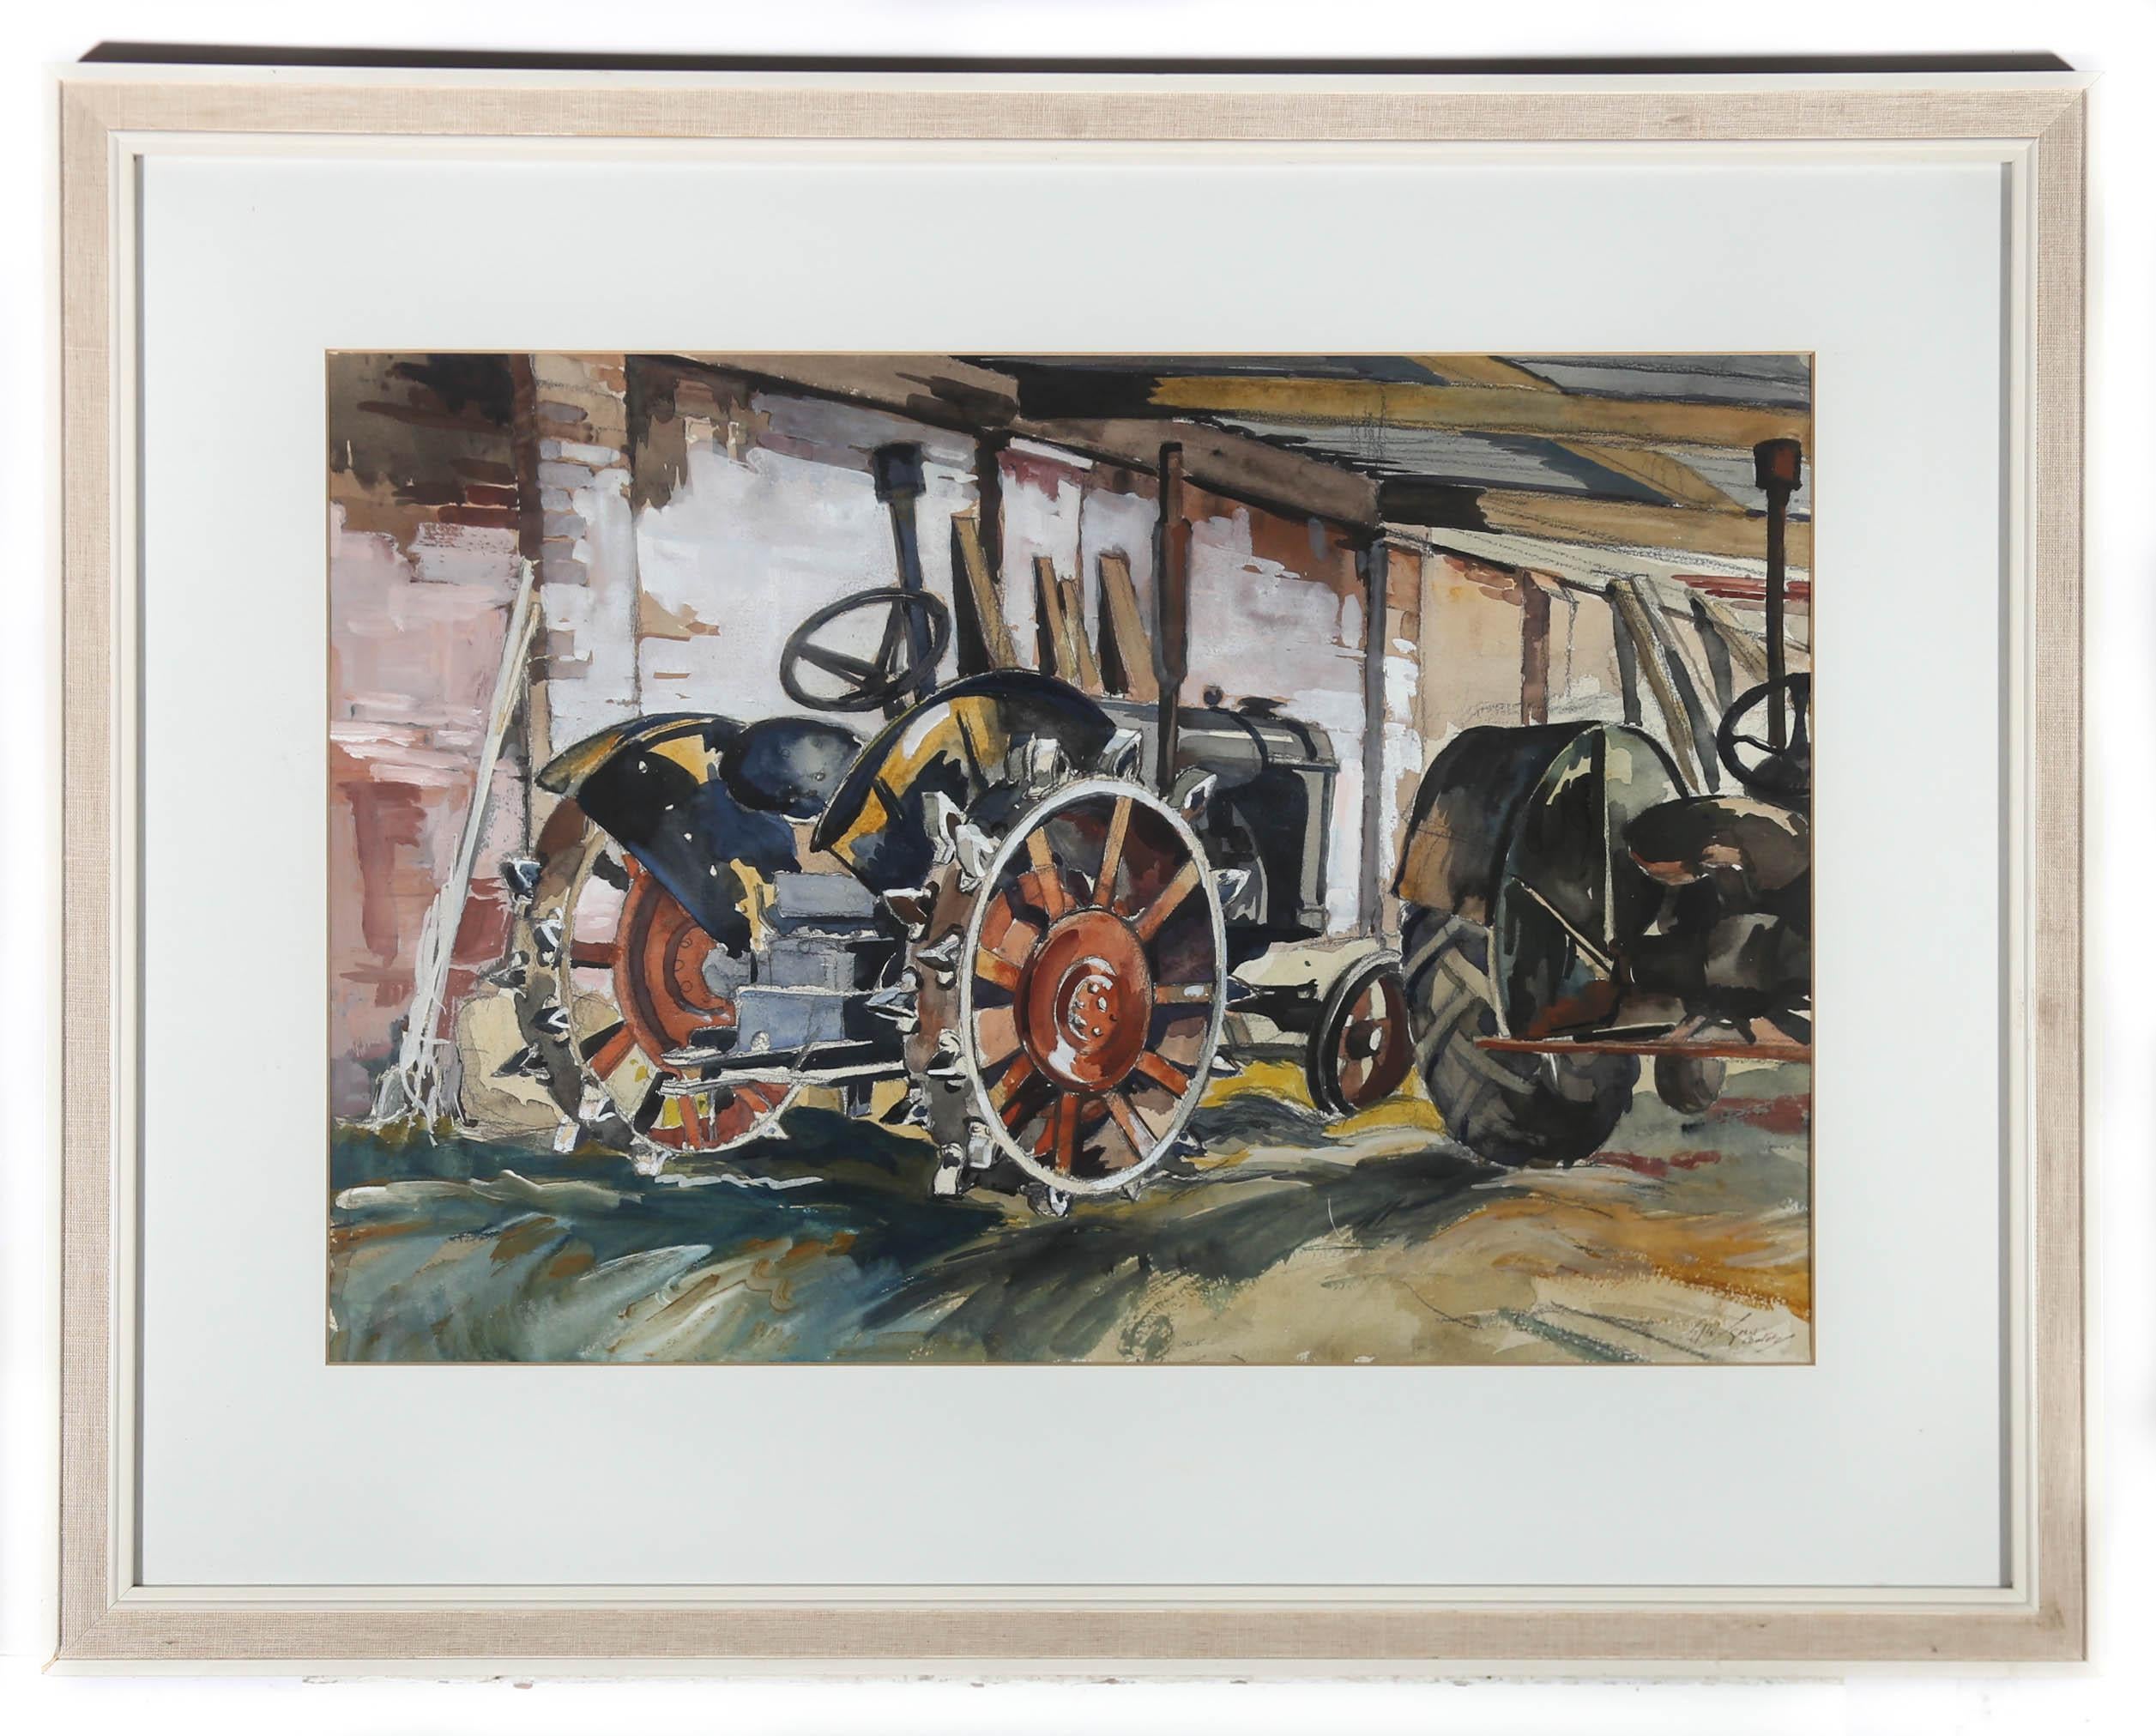 This charming watercolour shows a vintage Coates tractor protected from the elements in a farmer's shed. The artist has initialed and inscribed to the lower right, and the painting has been presented in a 20th Century white frame with linen detail